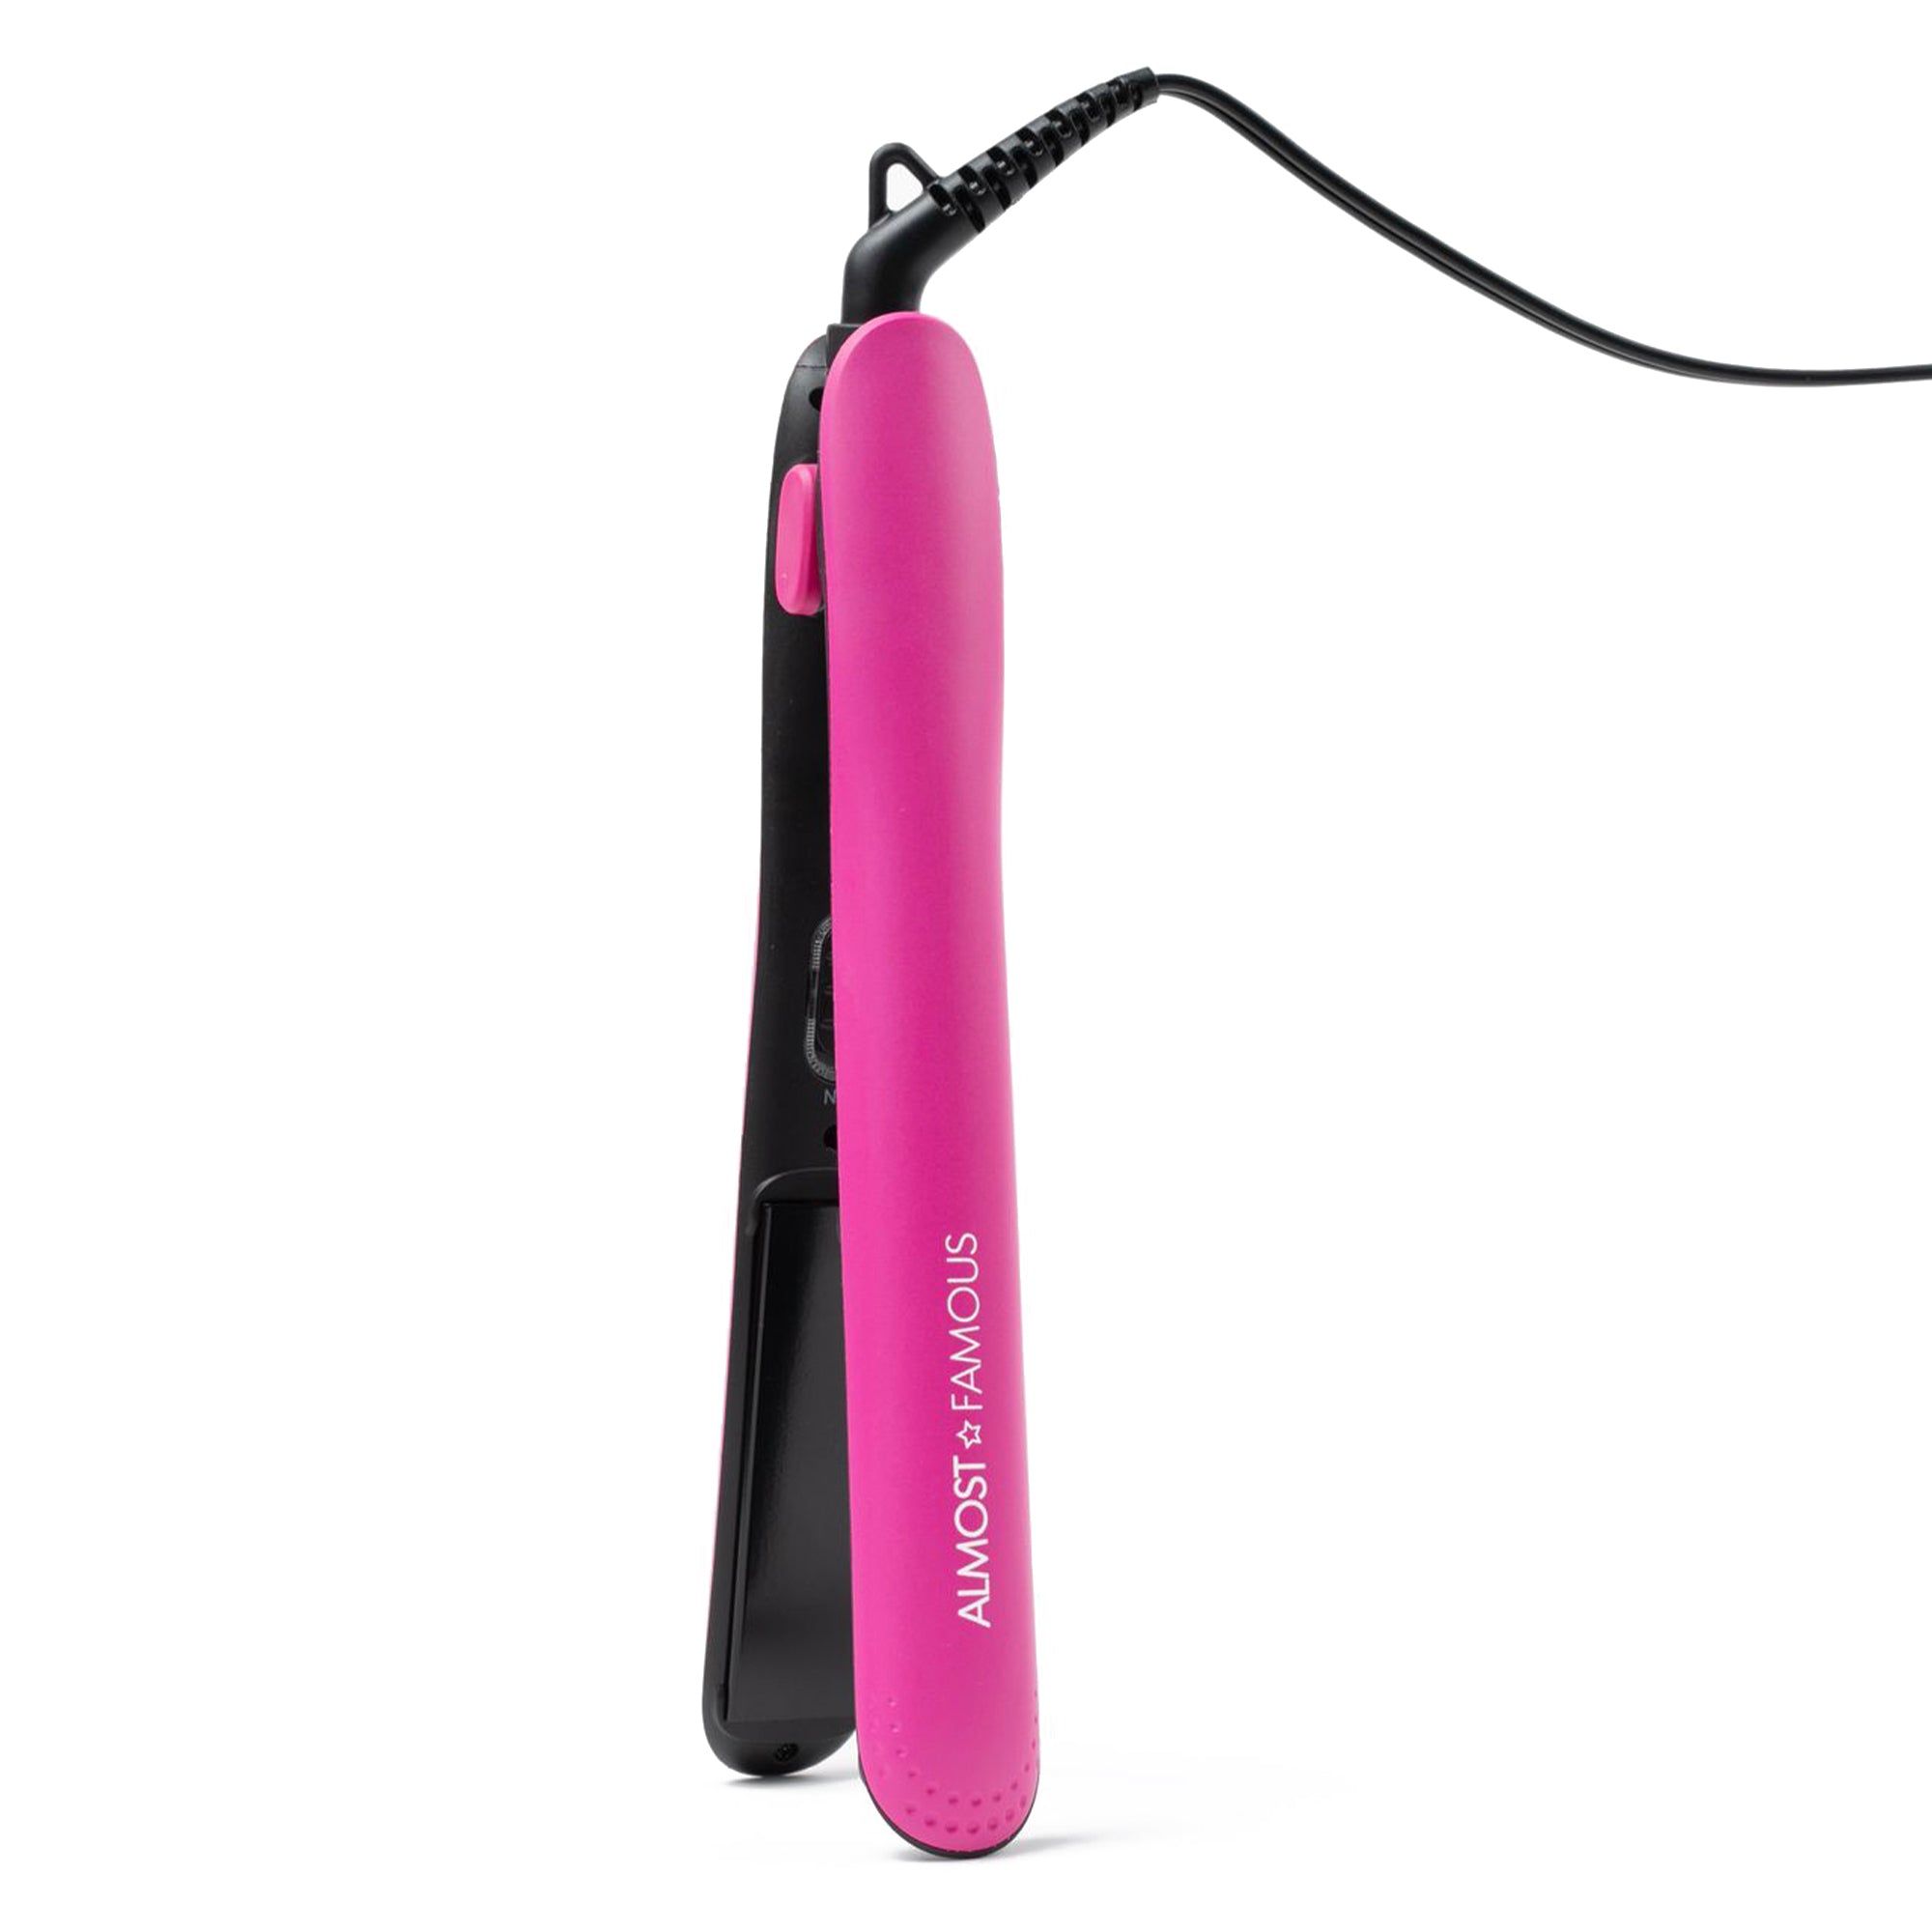 "Fierce Glam" Flat Iron with Travel Pouch